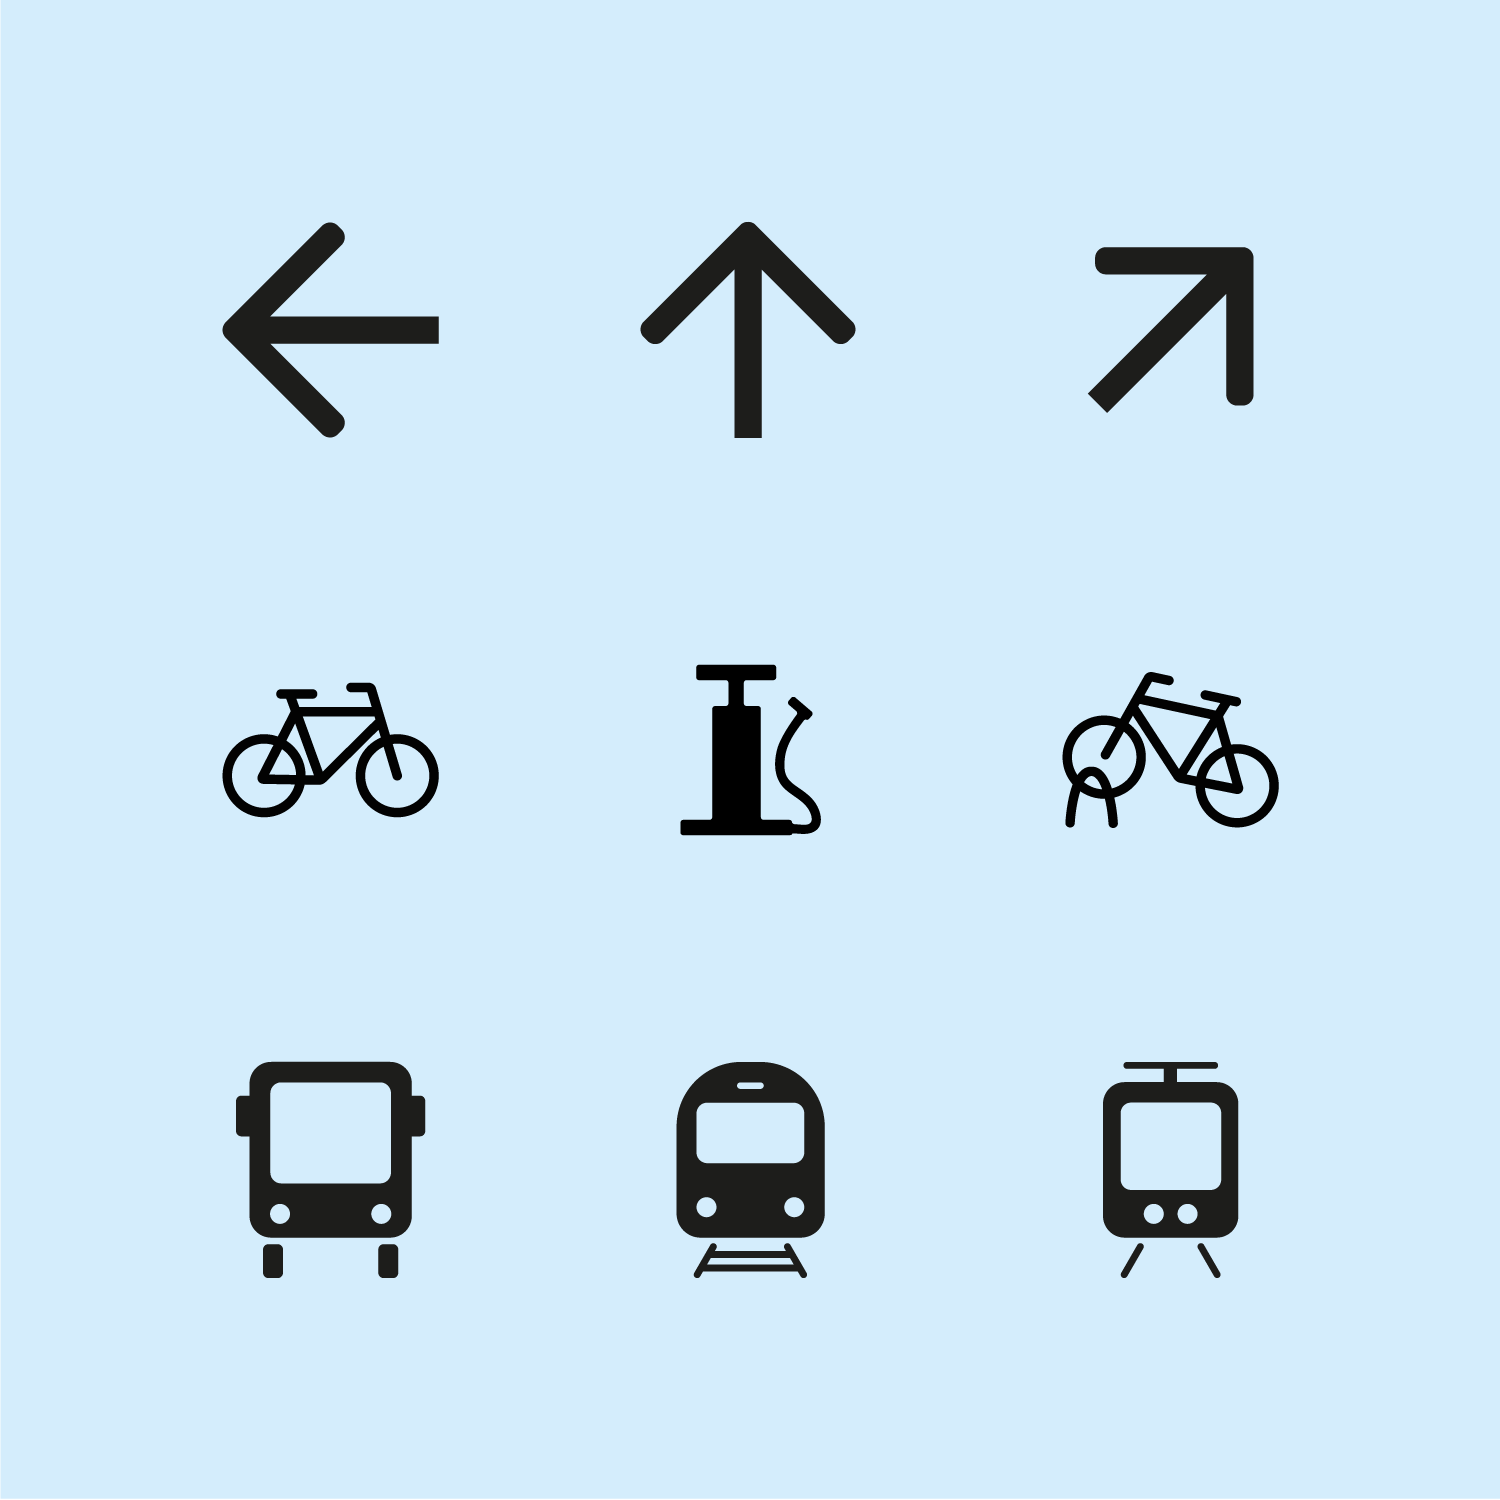 Bike signage pictograms for City of Norrköping by Viktor Lanneld and Vicky Trouerbach